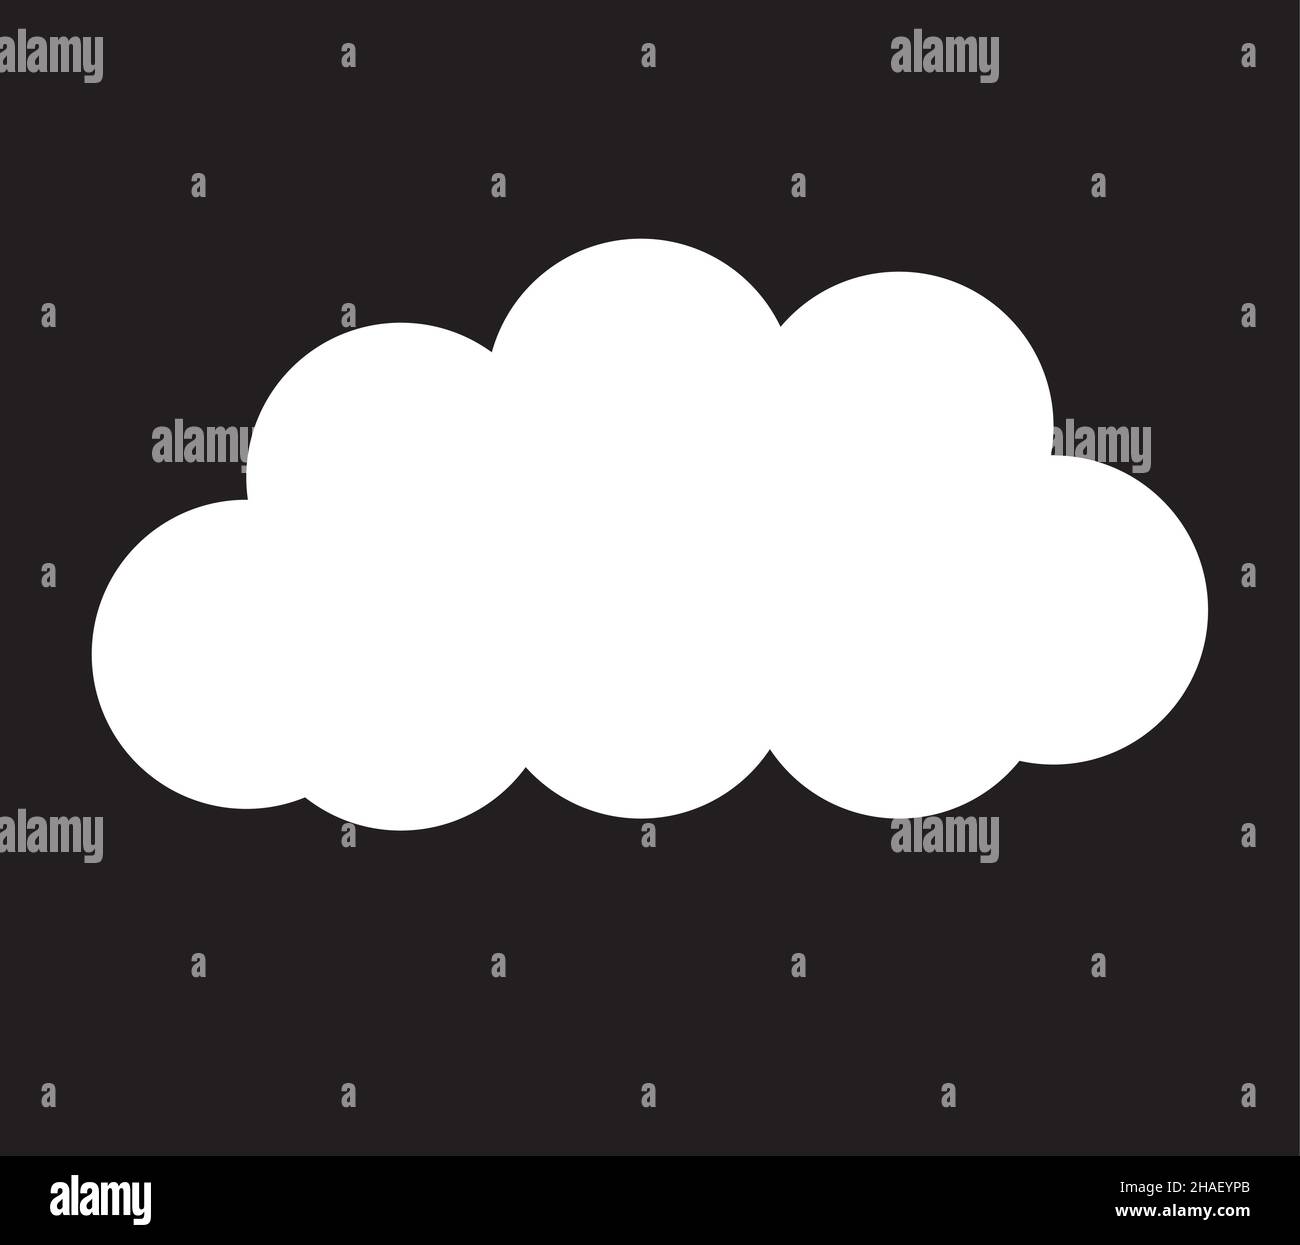 Cloud vector icon isolated over black background, single cloud vector illustration Stock Vector